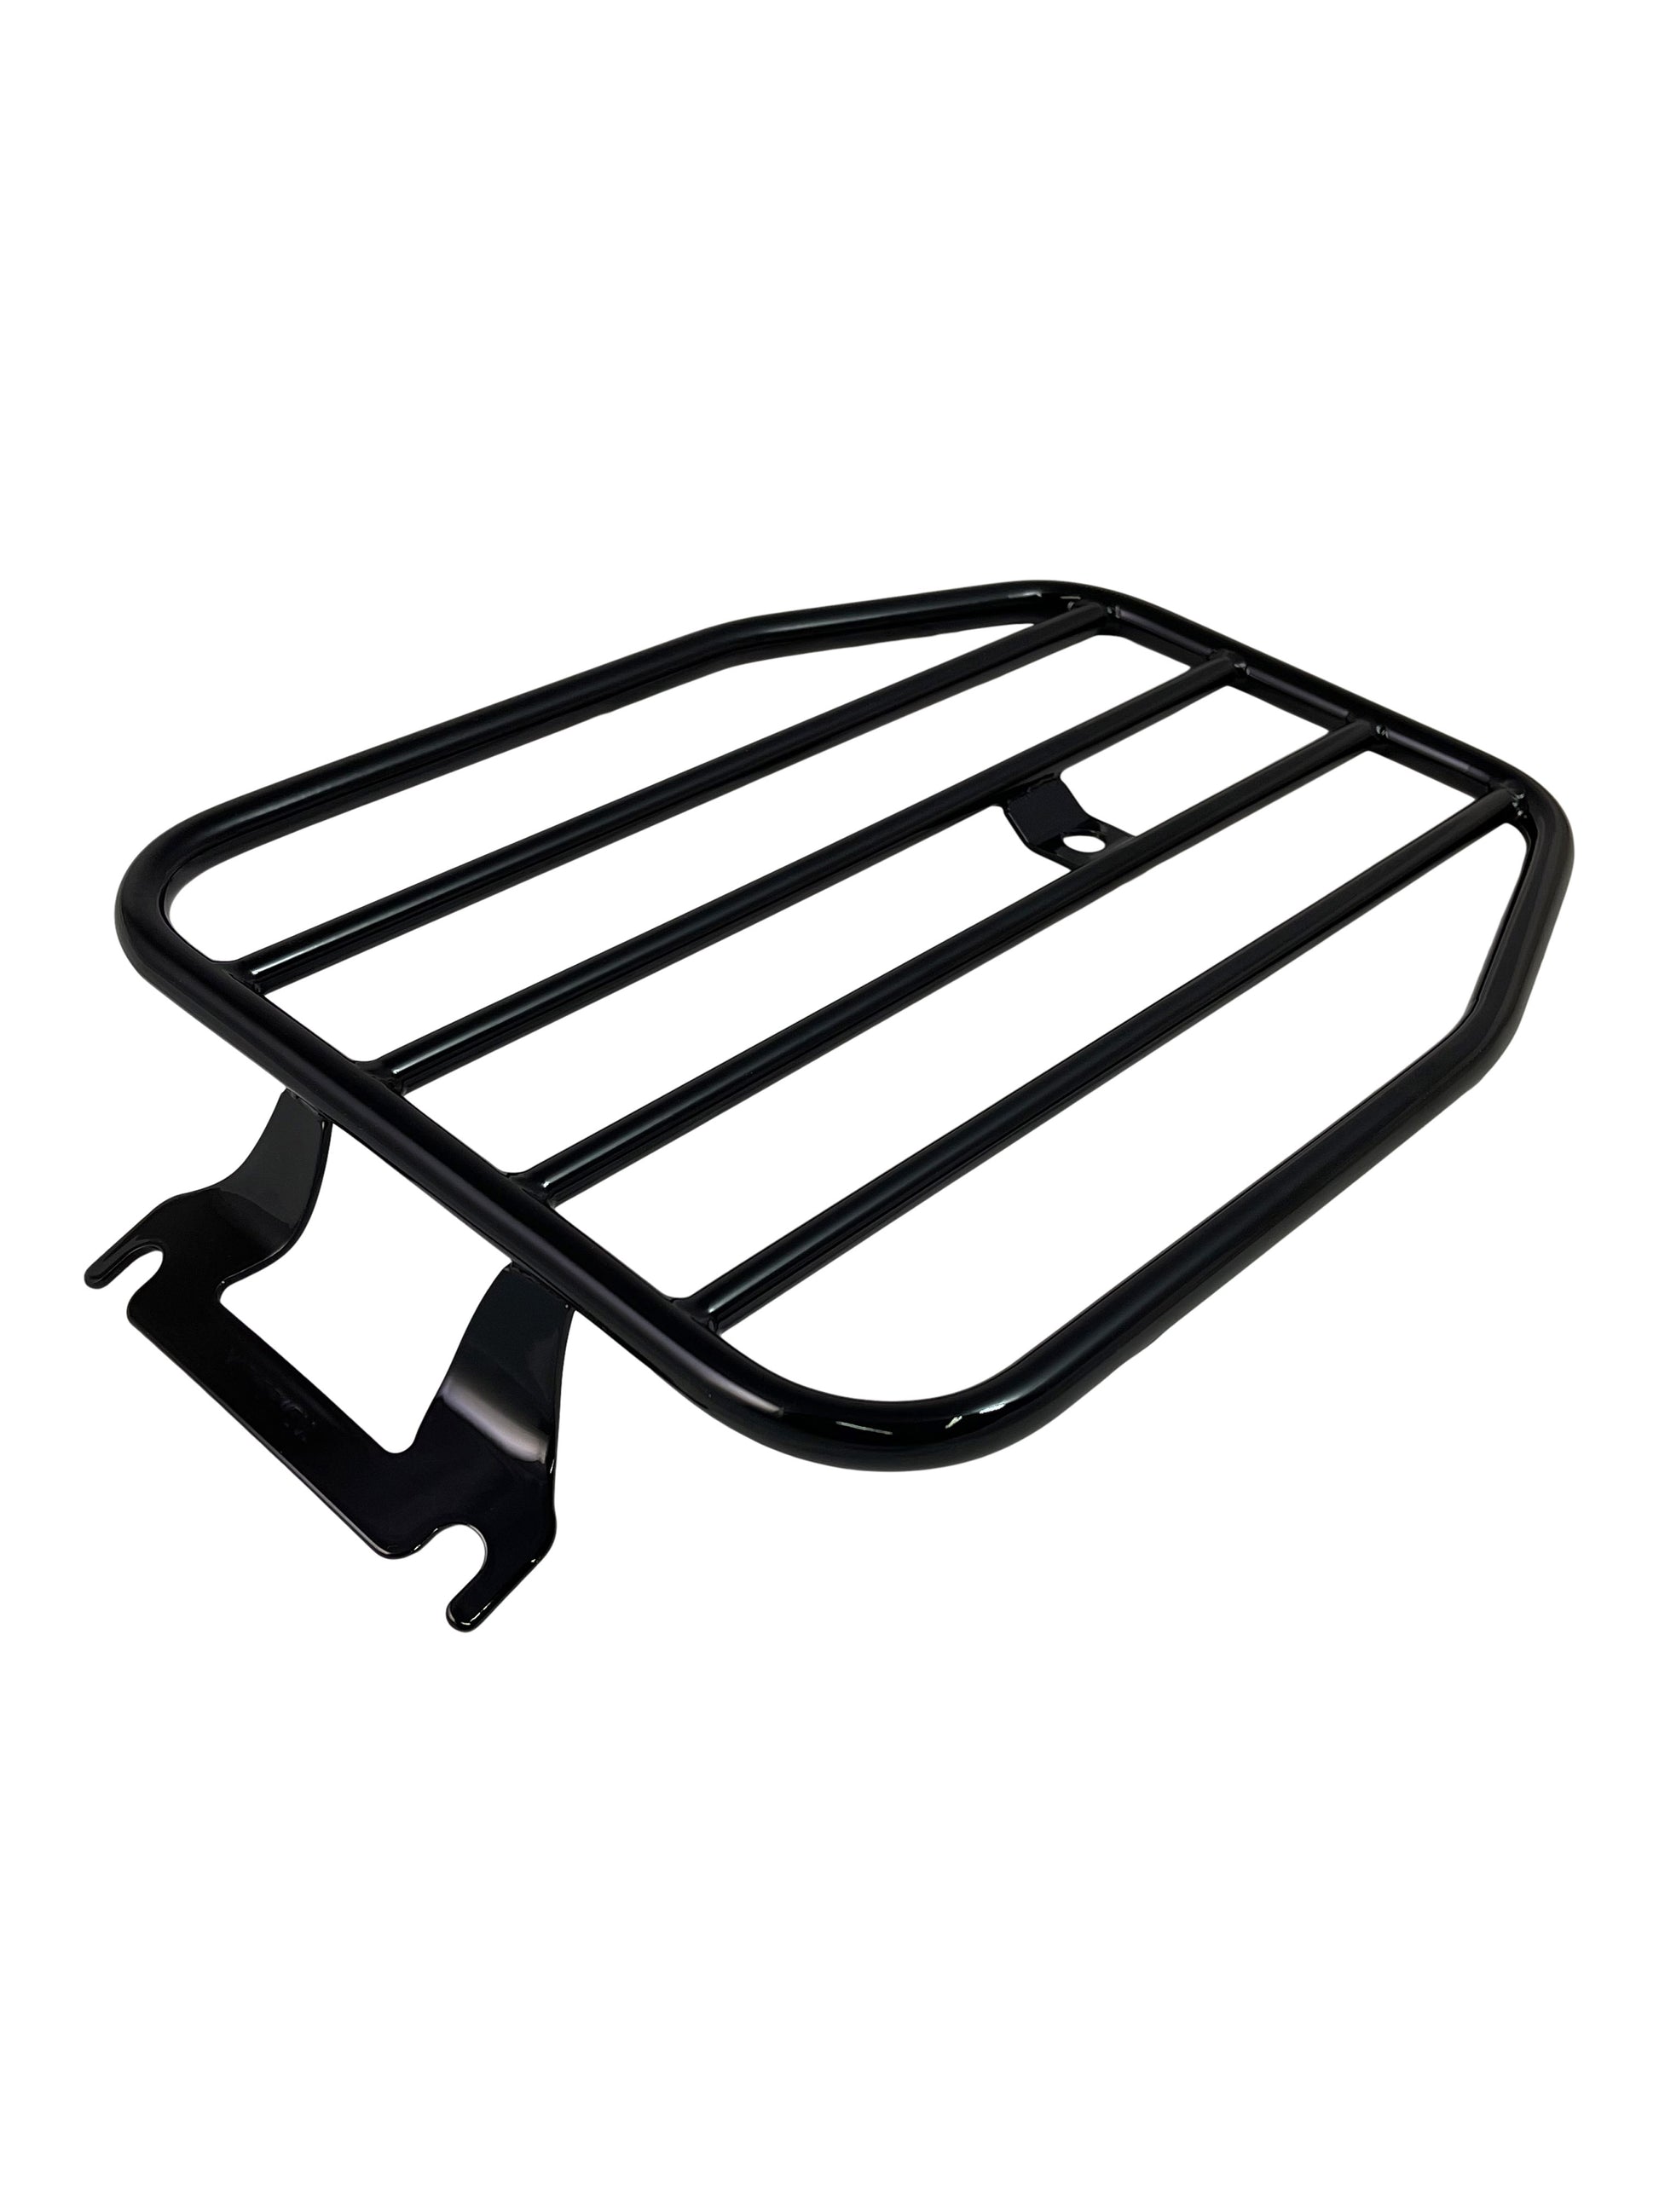 Flat 10.5 inch Solo Luggage Rack for your Harley Touring model  MWL-462